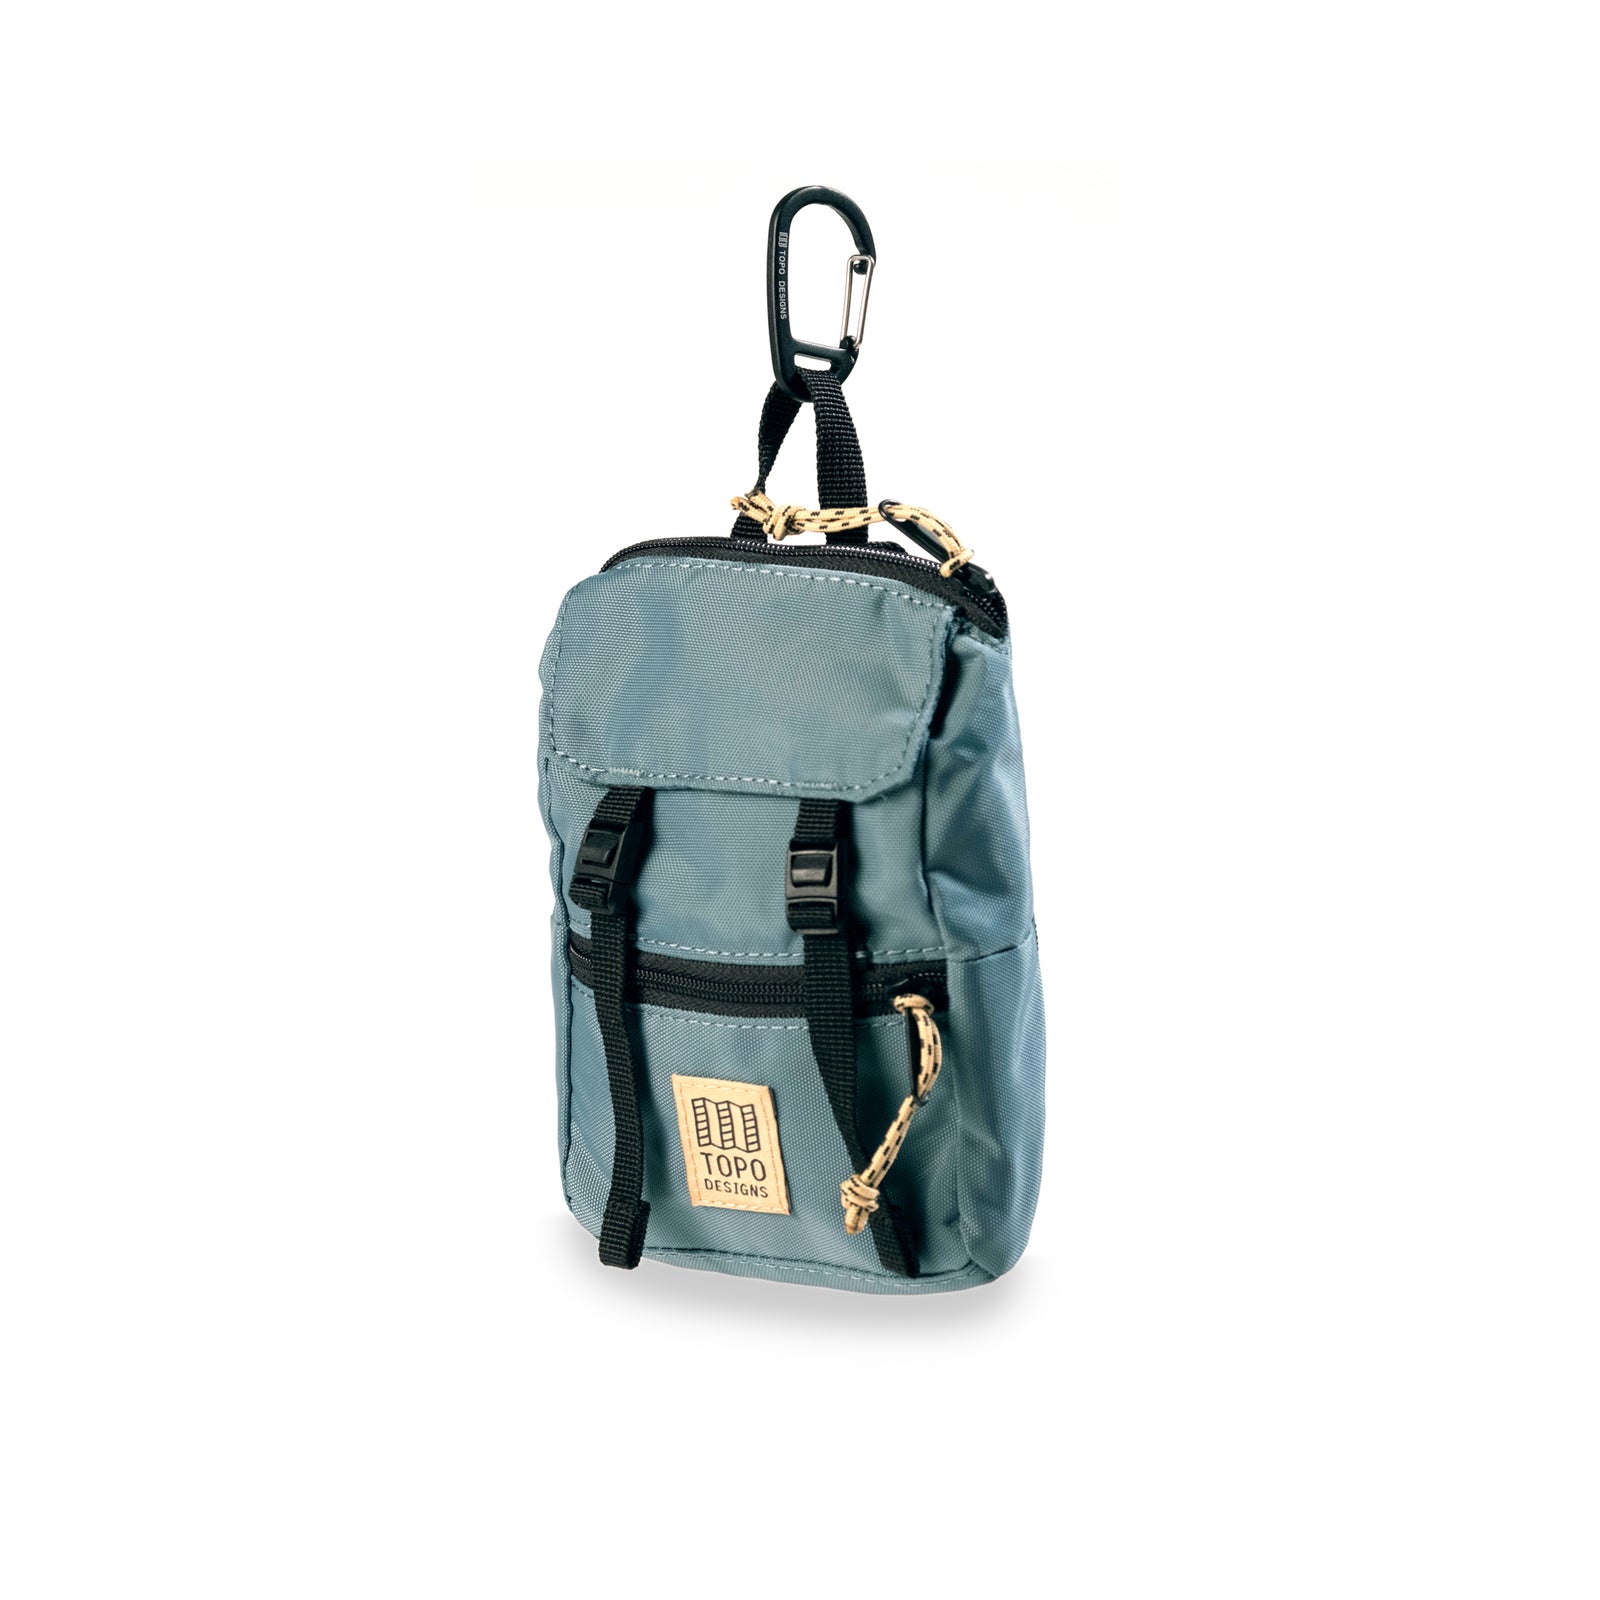 Front View of Topo Designs Rover Pack Micro in "Sea Pine"